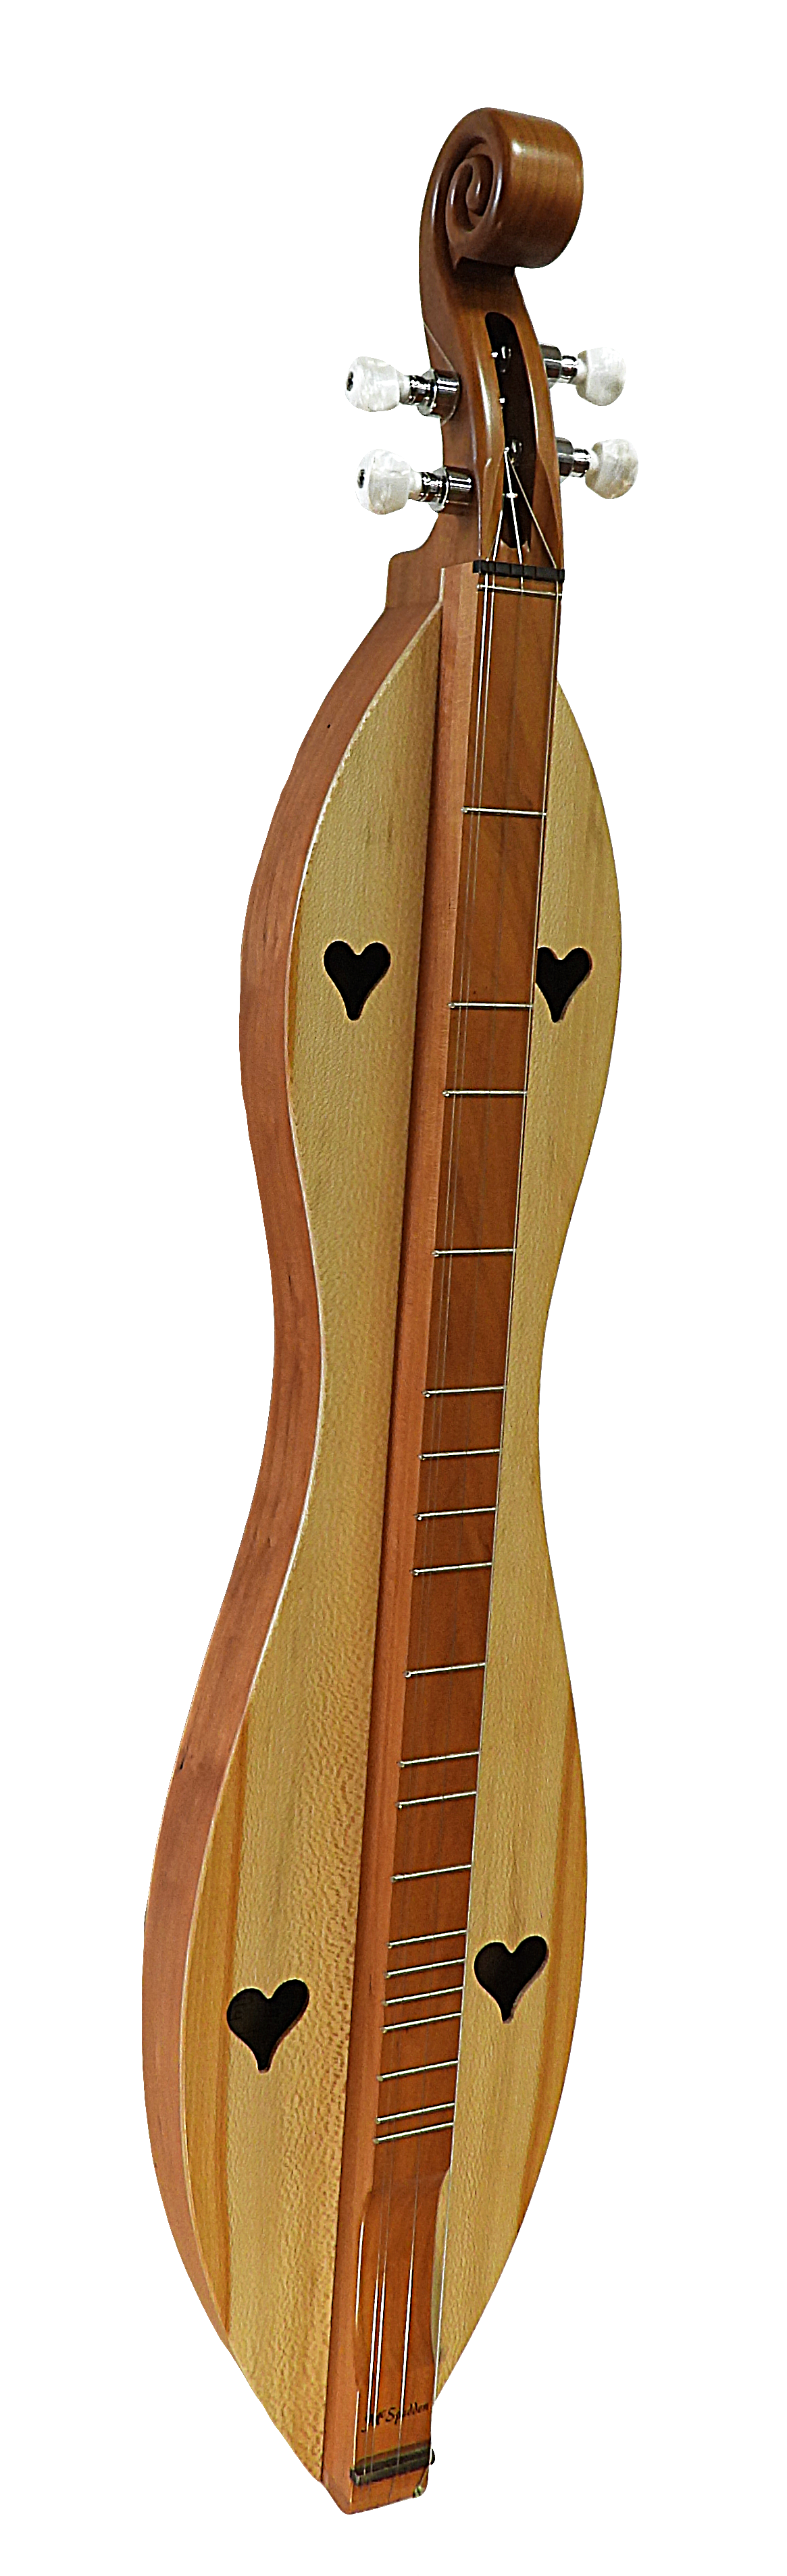 4 String, Scroll head, Hourglass with Cherry back and sides, Quarter Sawn or Spalted Sycamore top (4SHCSY)